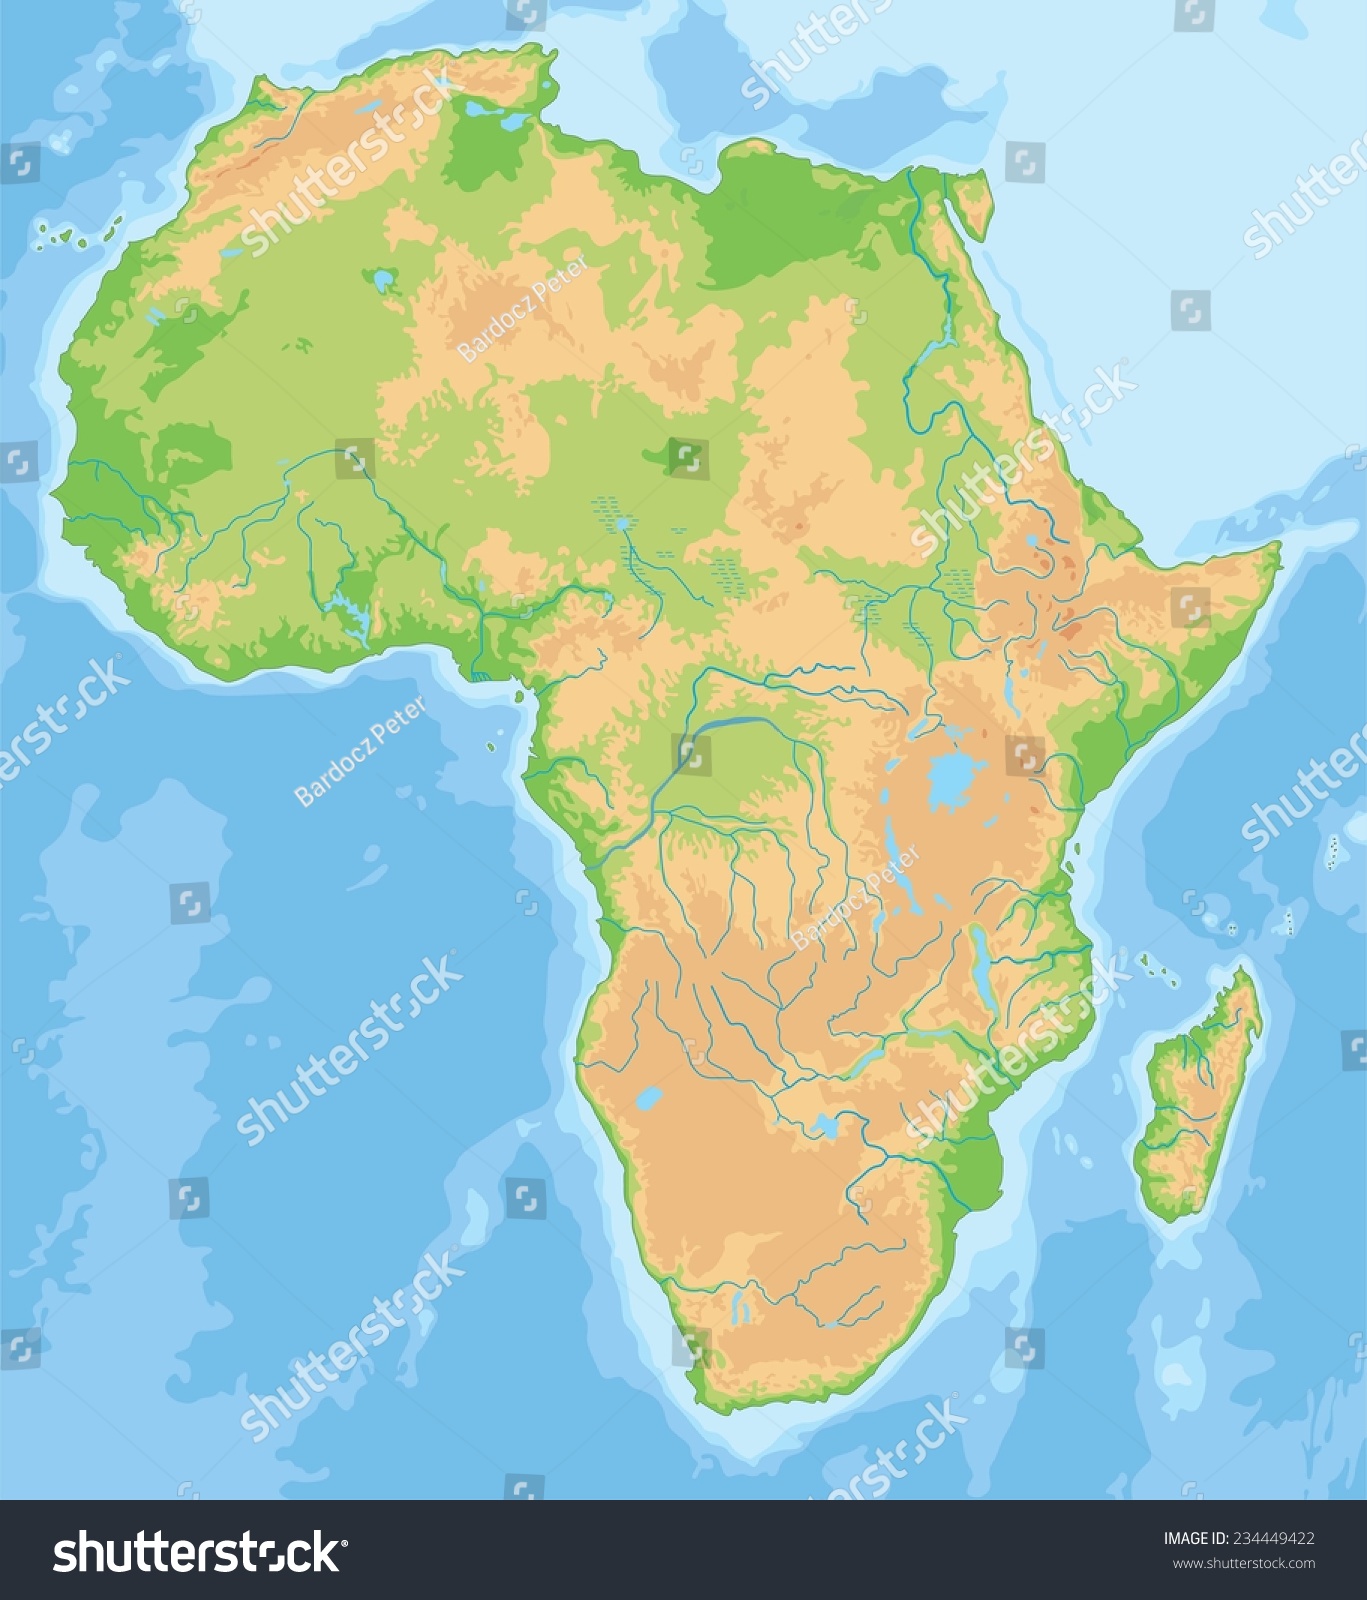 High Detailed Africa Physical Map Stock Vector Illustration 234449422 Shutterstock 3074